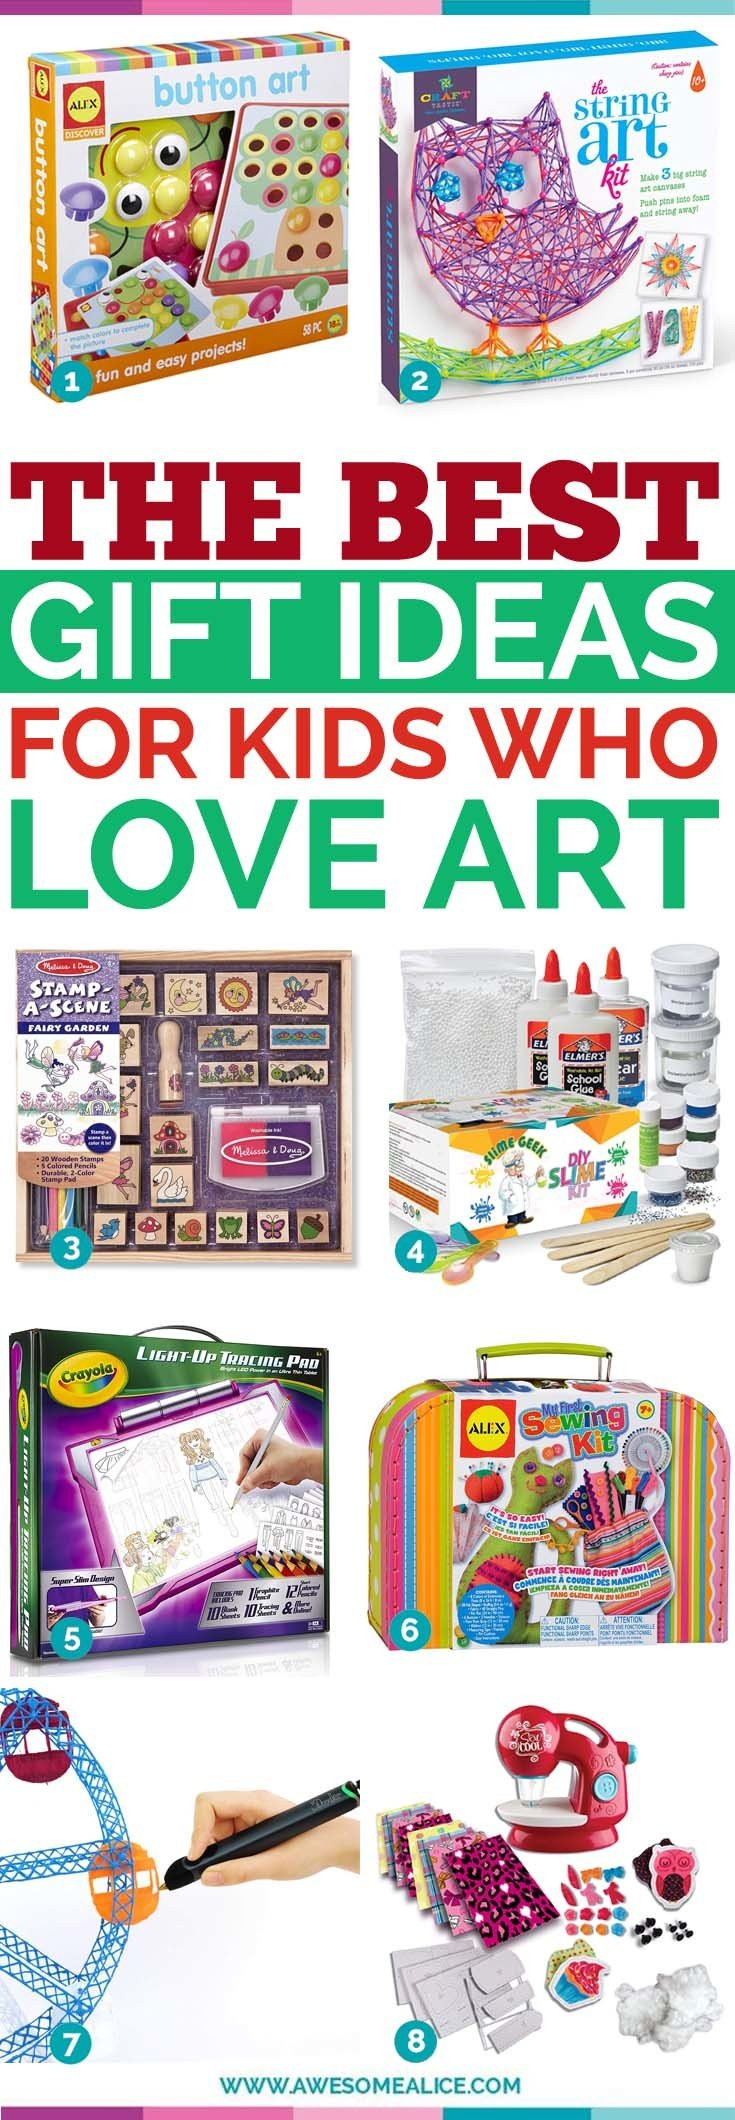 Gifts For Artistic Kids
 Top 30 Gift Ideas for Creative Kids Who Love Art